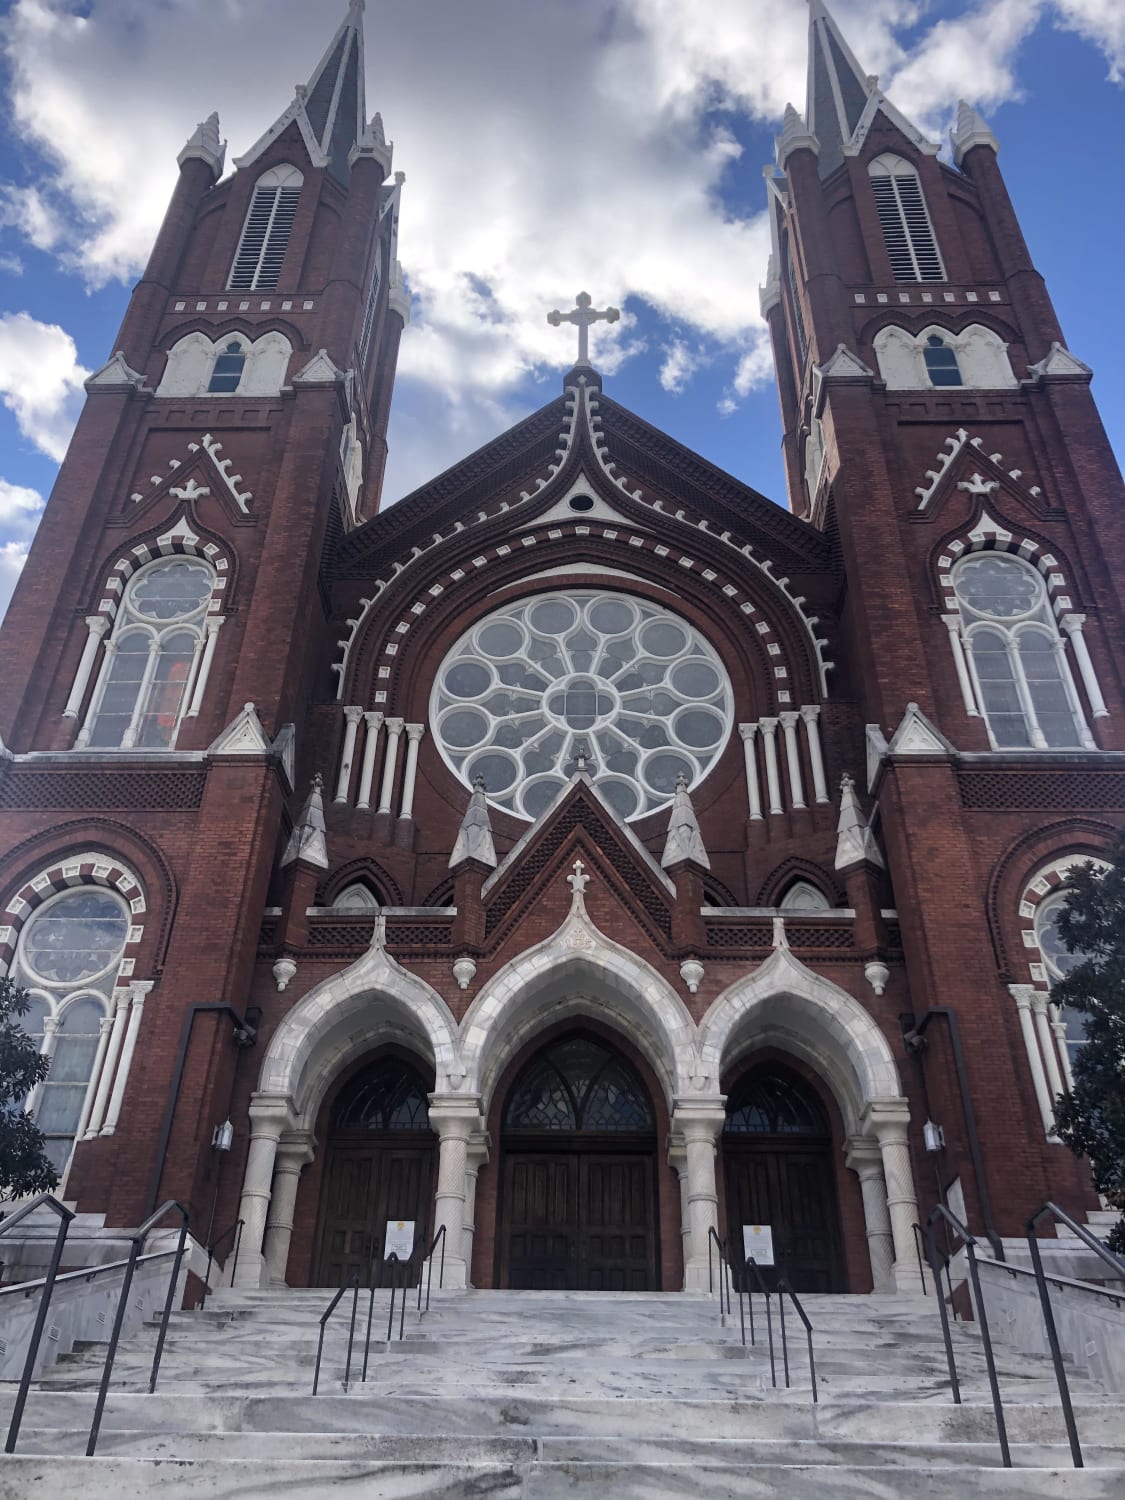 The most elaborate building I’ve ever seen in person is also in my city: St. Joseph’s Cathedral, 1892, Macon Ga. Such incredibly ornate brick work.